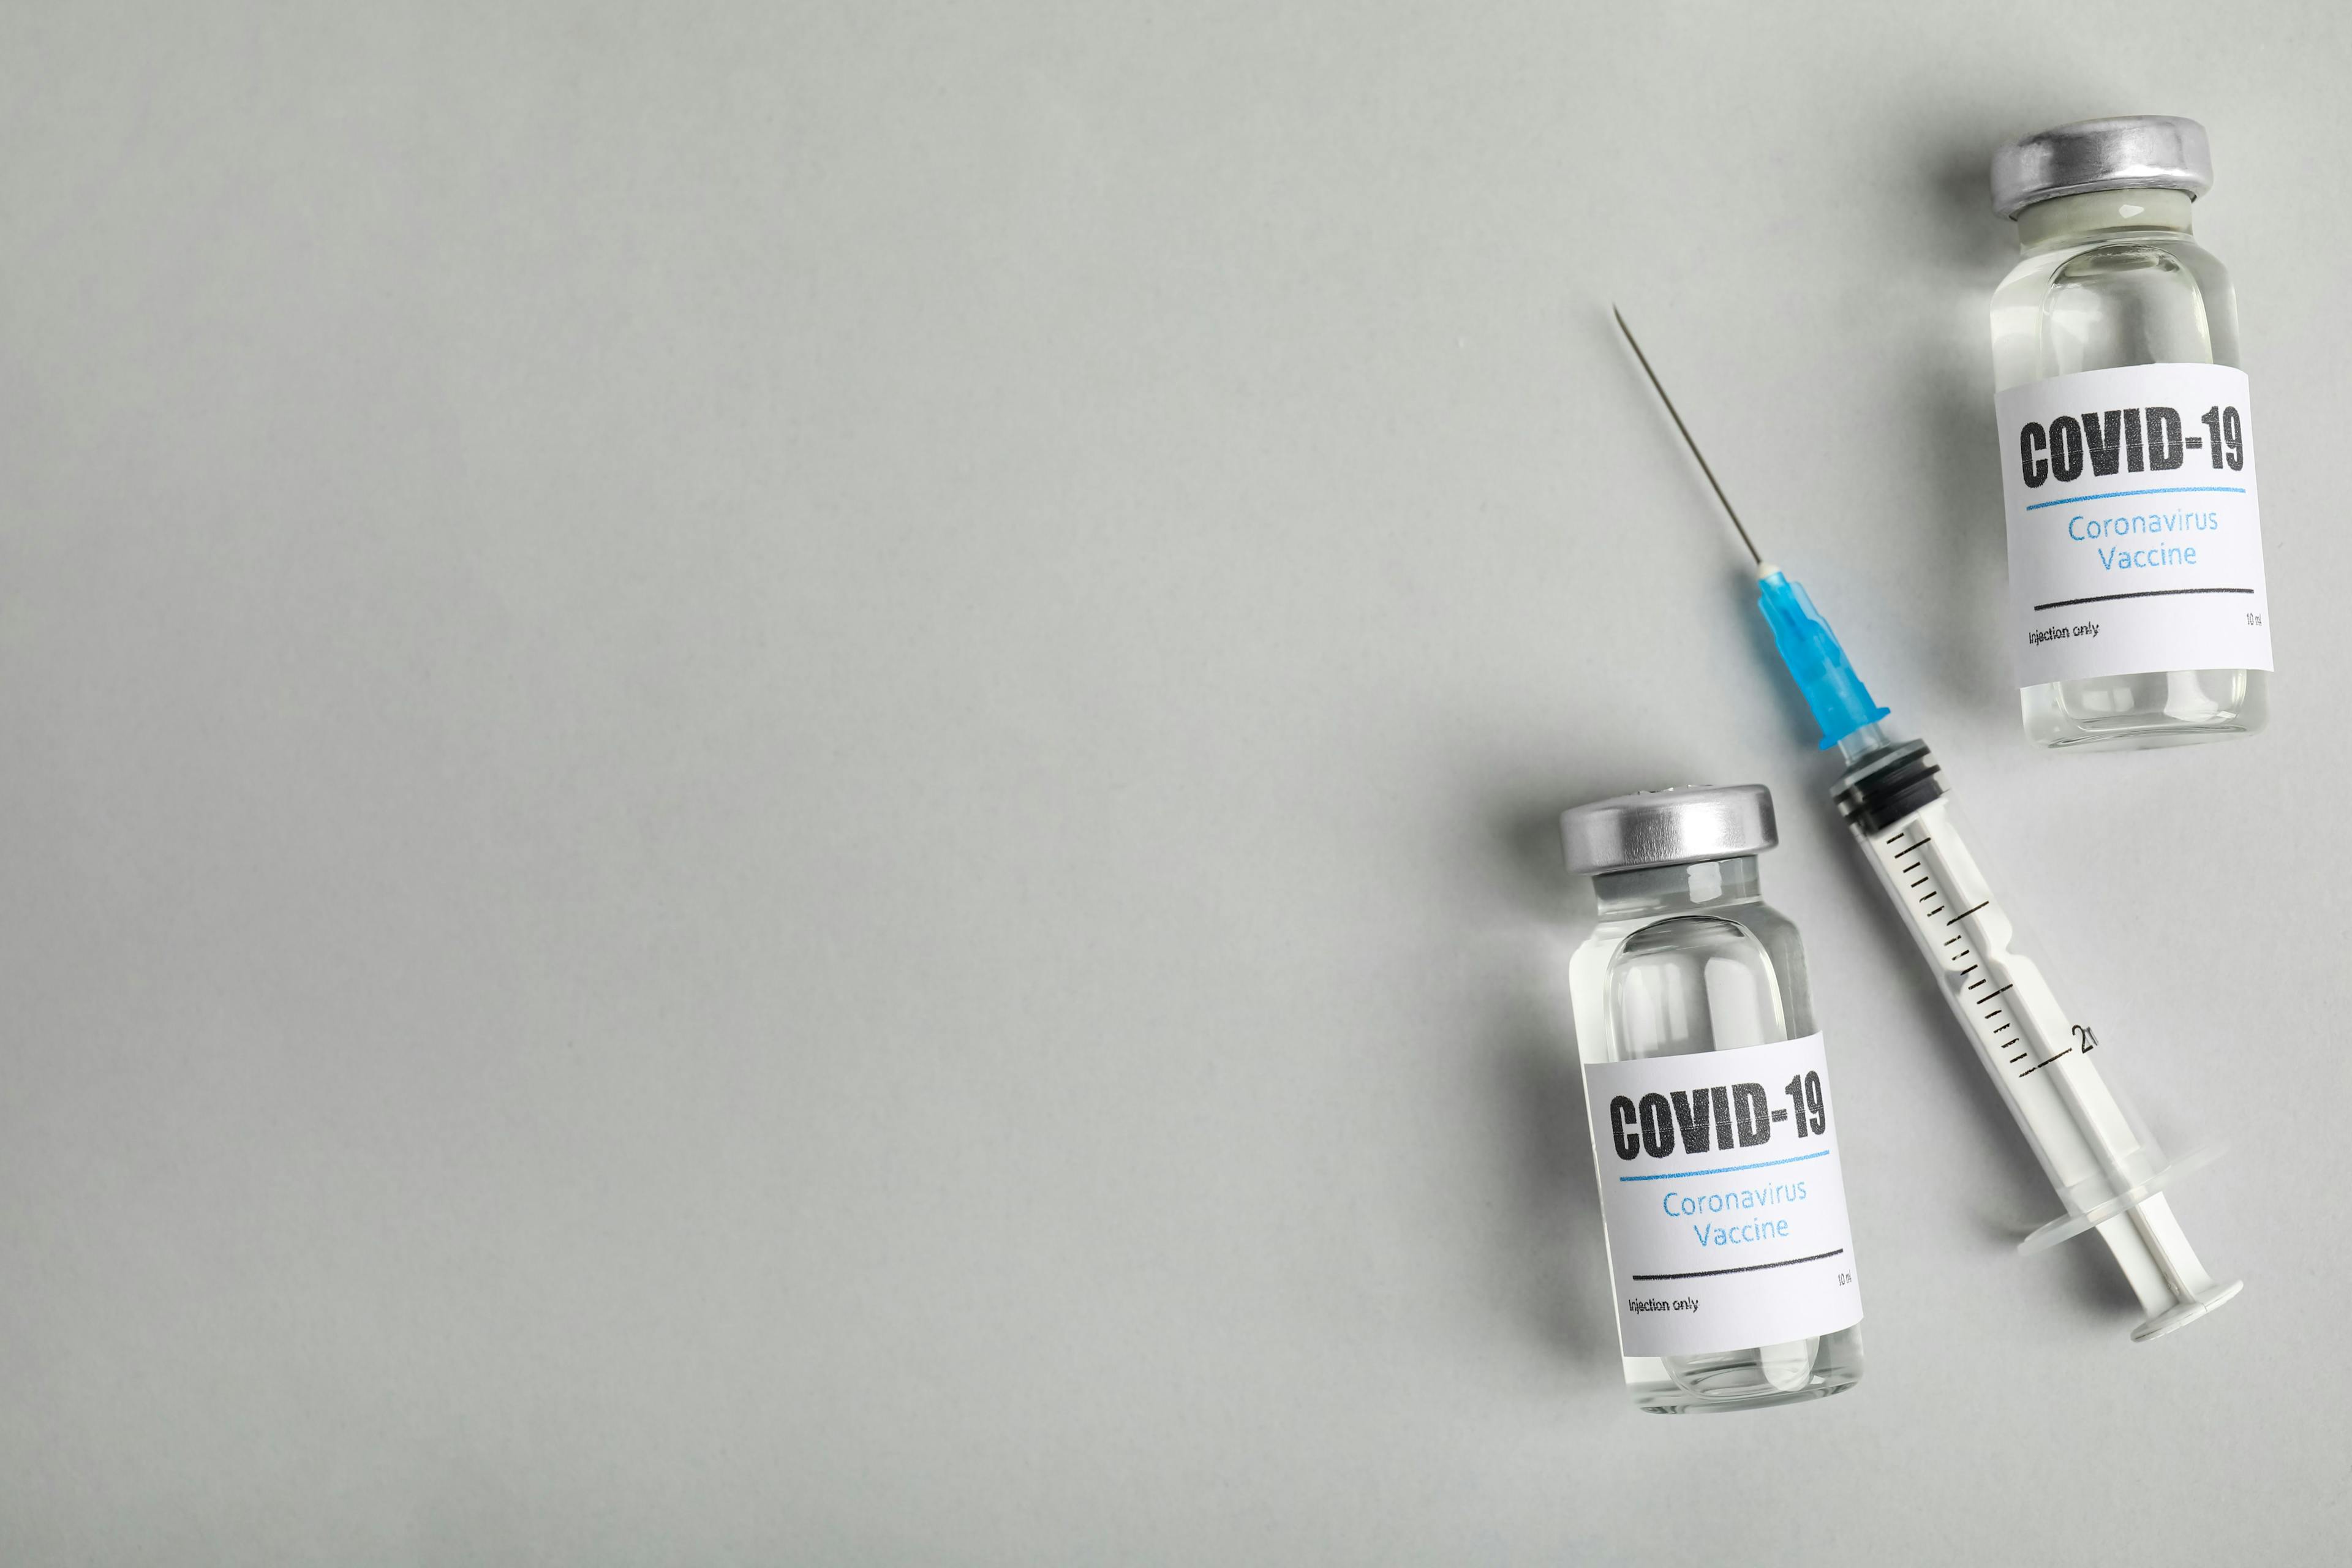 Should health care workers with anxiety qualify for an exemption from vaccine mandates?